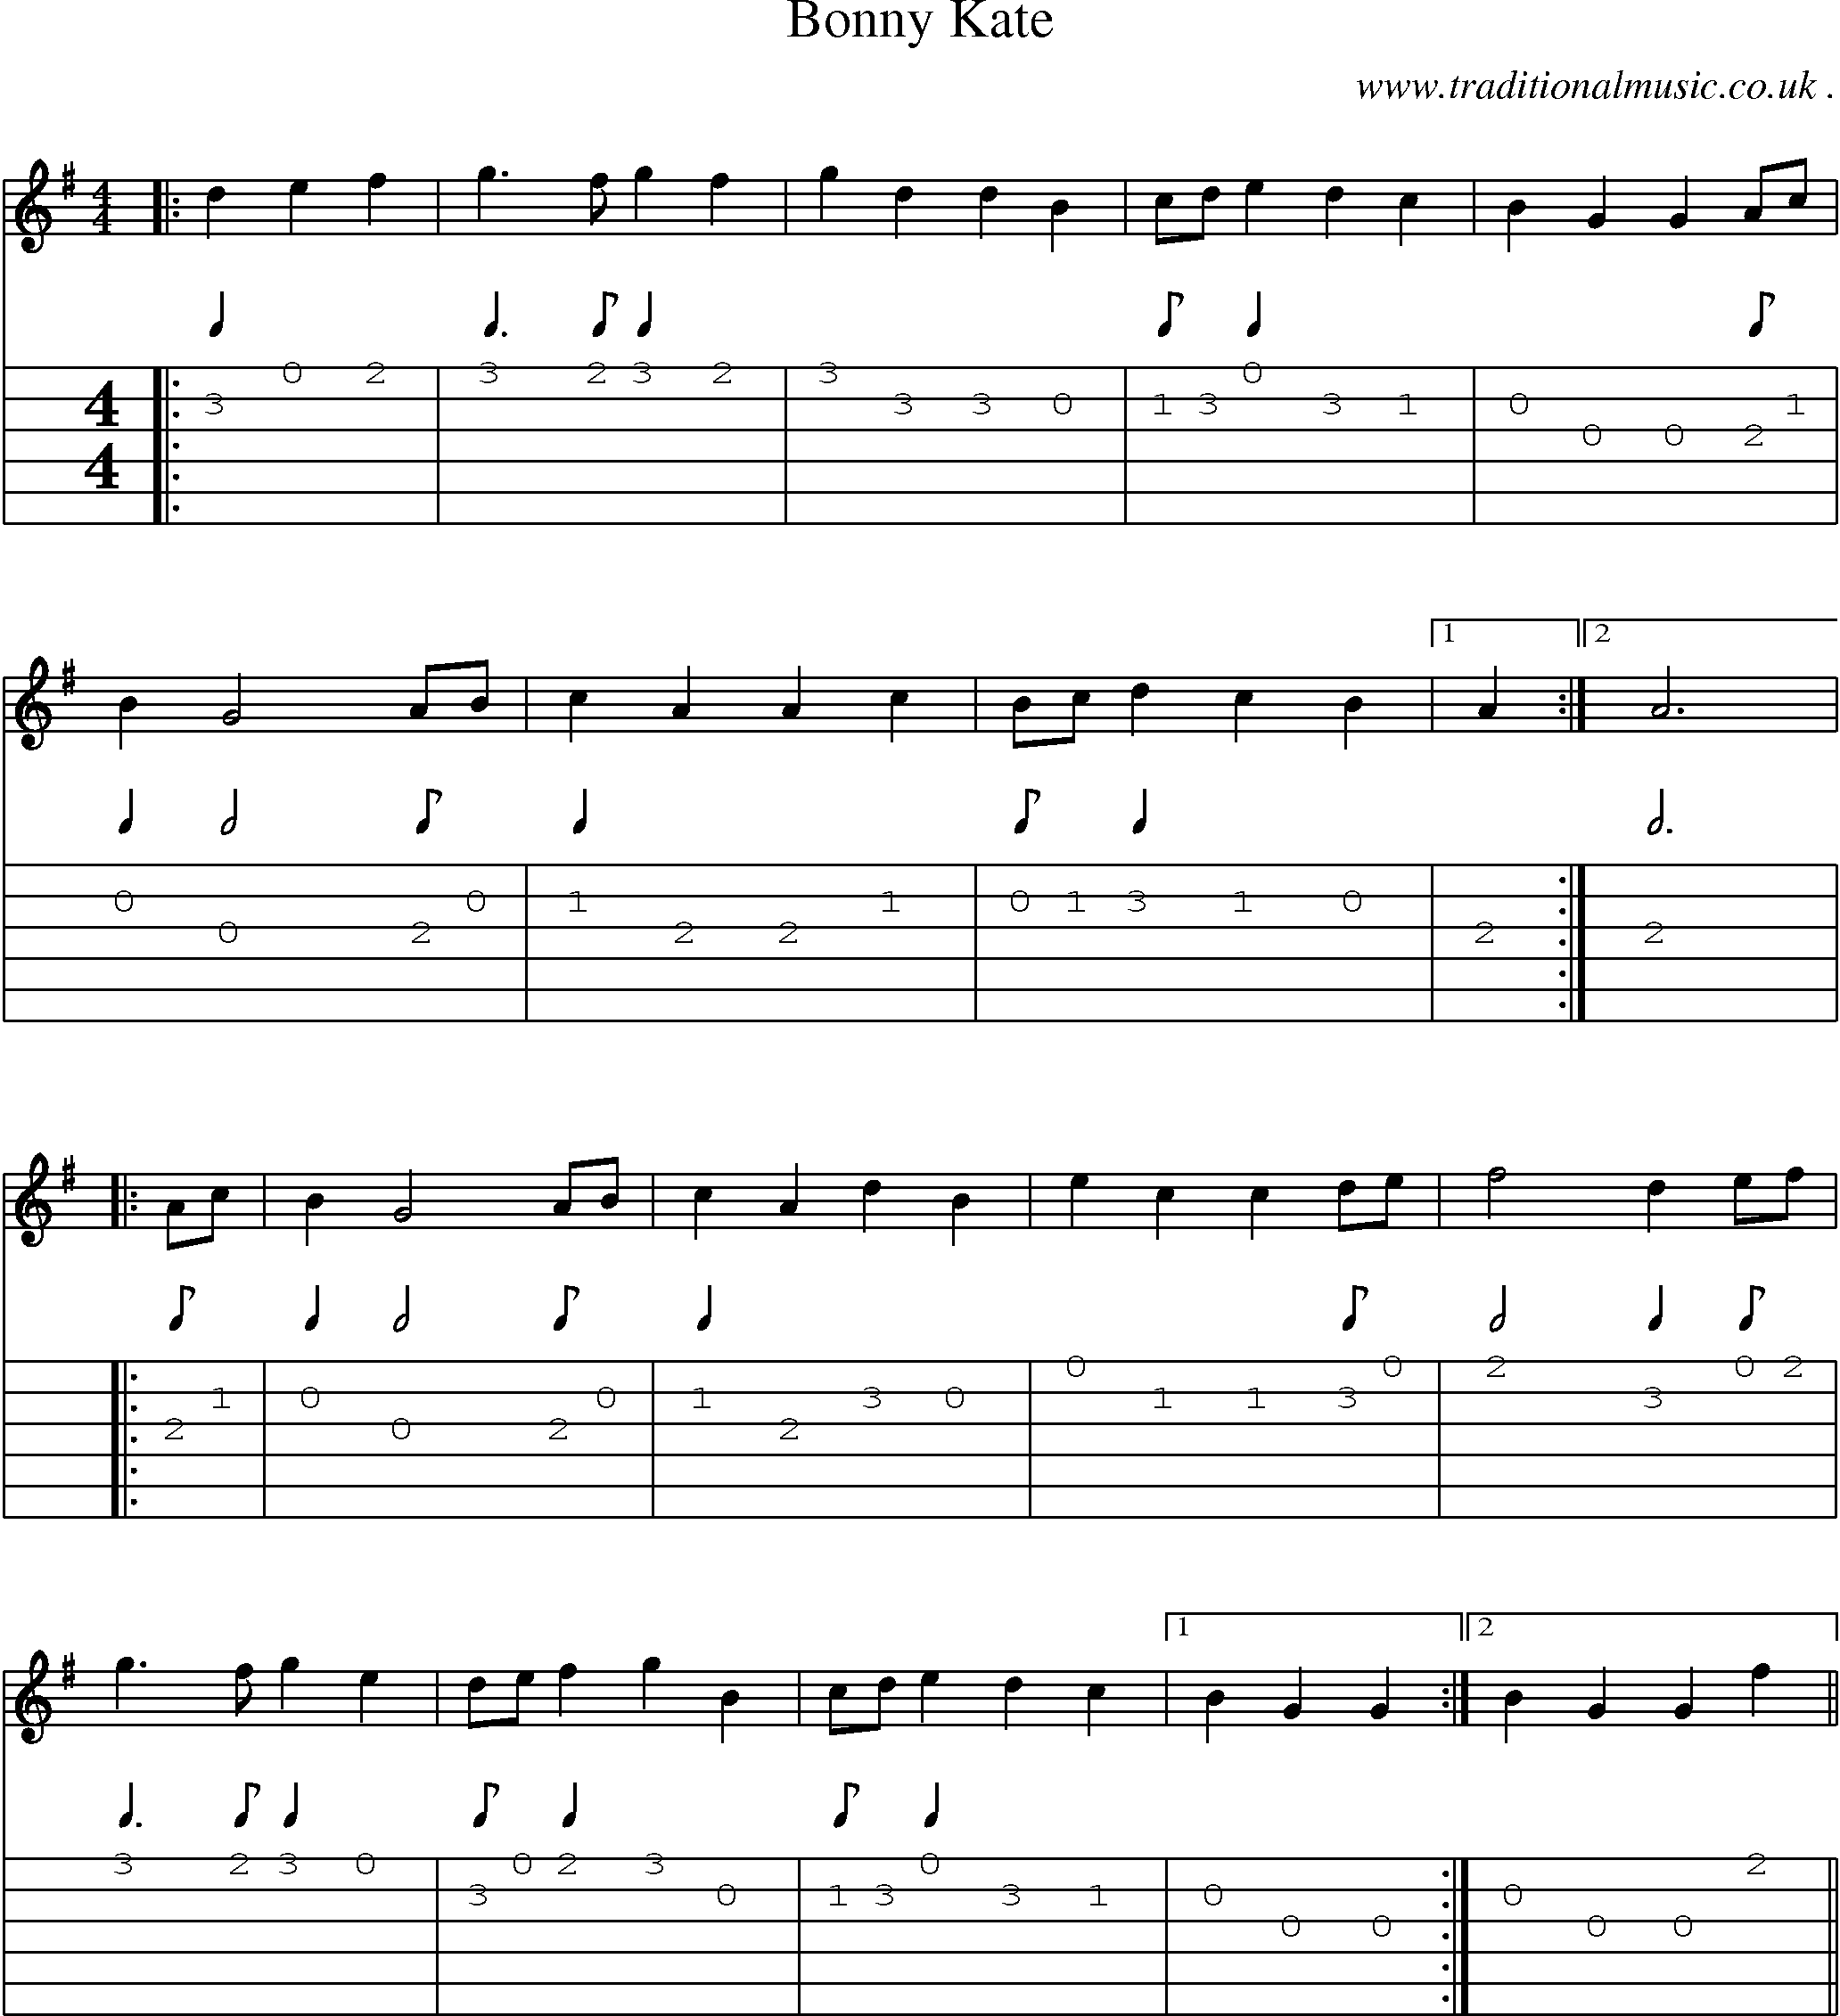 Sheet-Music and Guitar Tabs for Bonny Kate